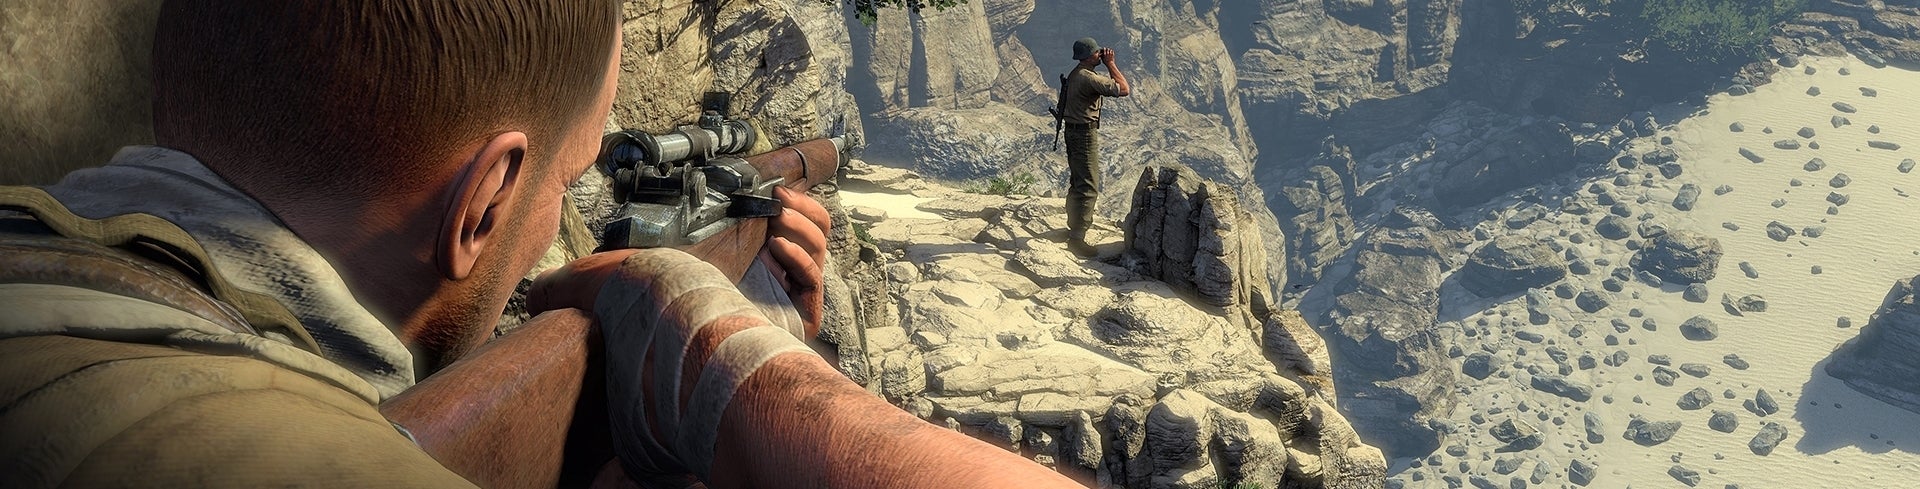 Image for Sniper Elite 3 is an unspectacular and shamelessly entertaining sequel